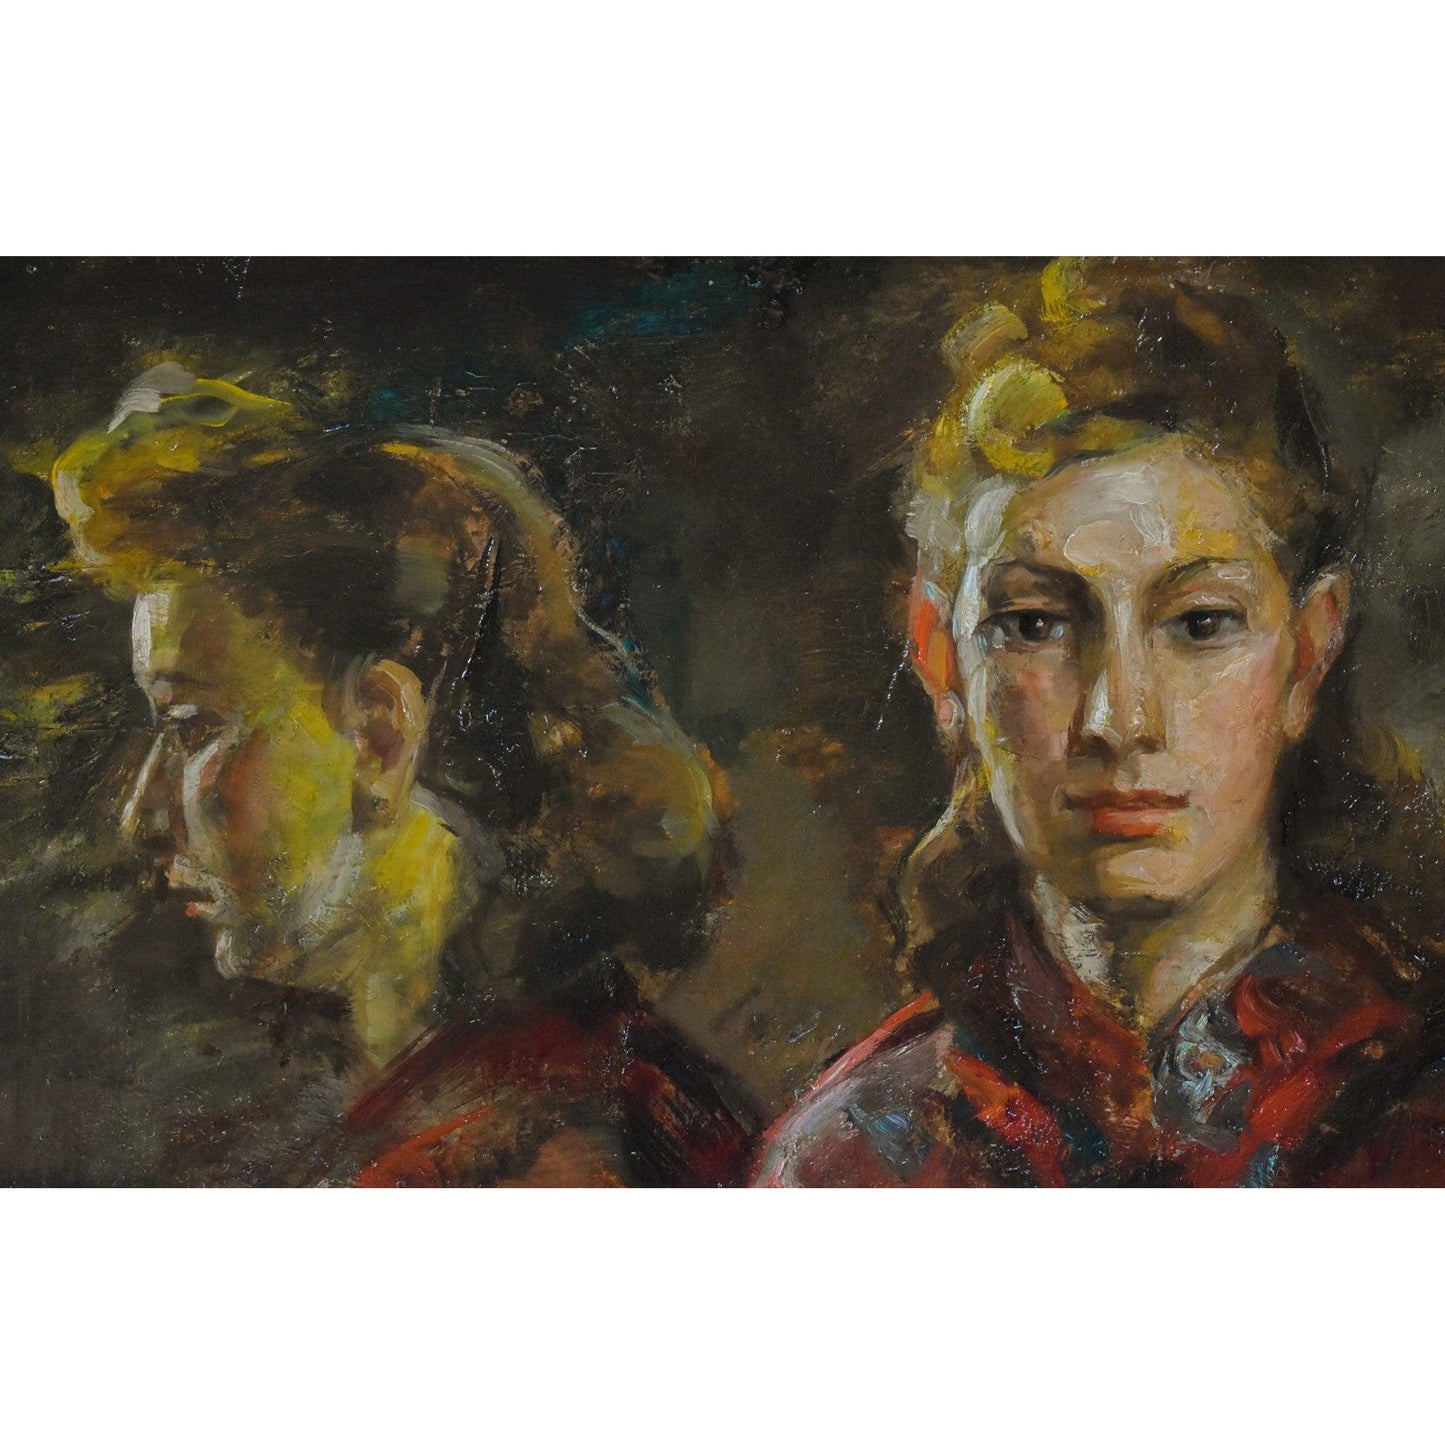 Vintage oil painting portrait, woman at the mirror, circa 1940, by Karel Cnockaert for sale at Winckelmann Gallery